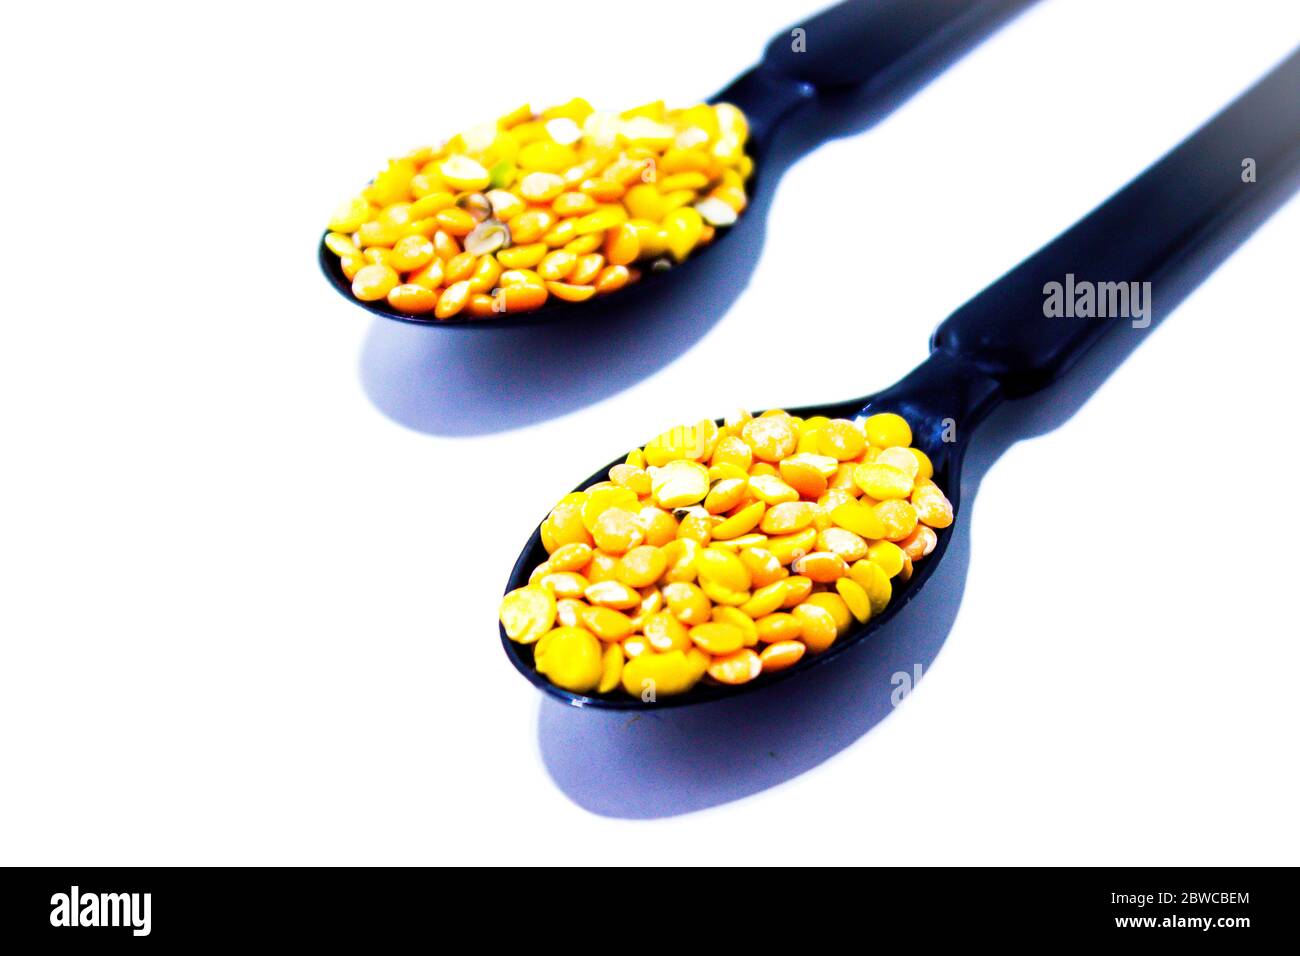 A picture of lentil Stock Photo